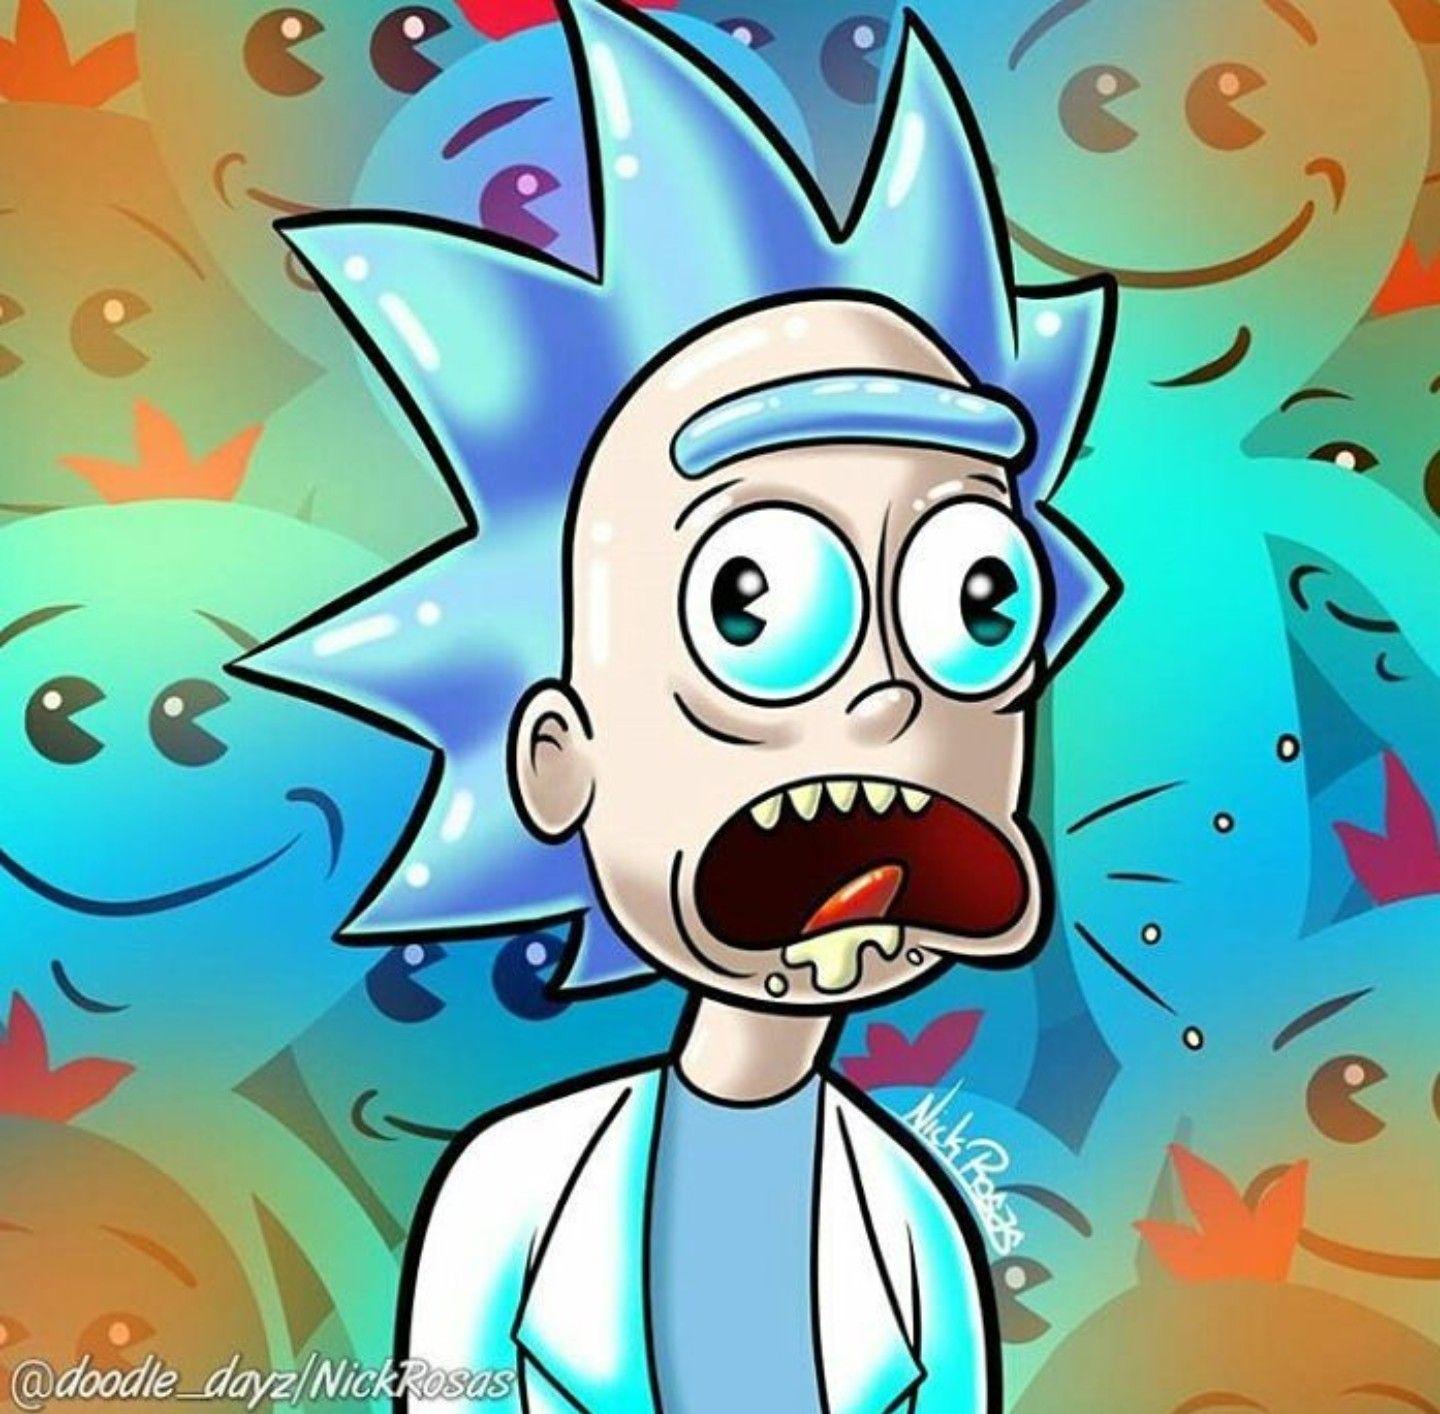 1440 x 1414 · jpeg - Weed Rick And Morty Background - Weed Rick And Morty Background / Rick ...